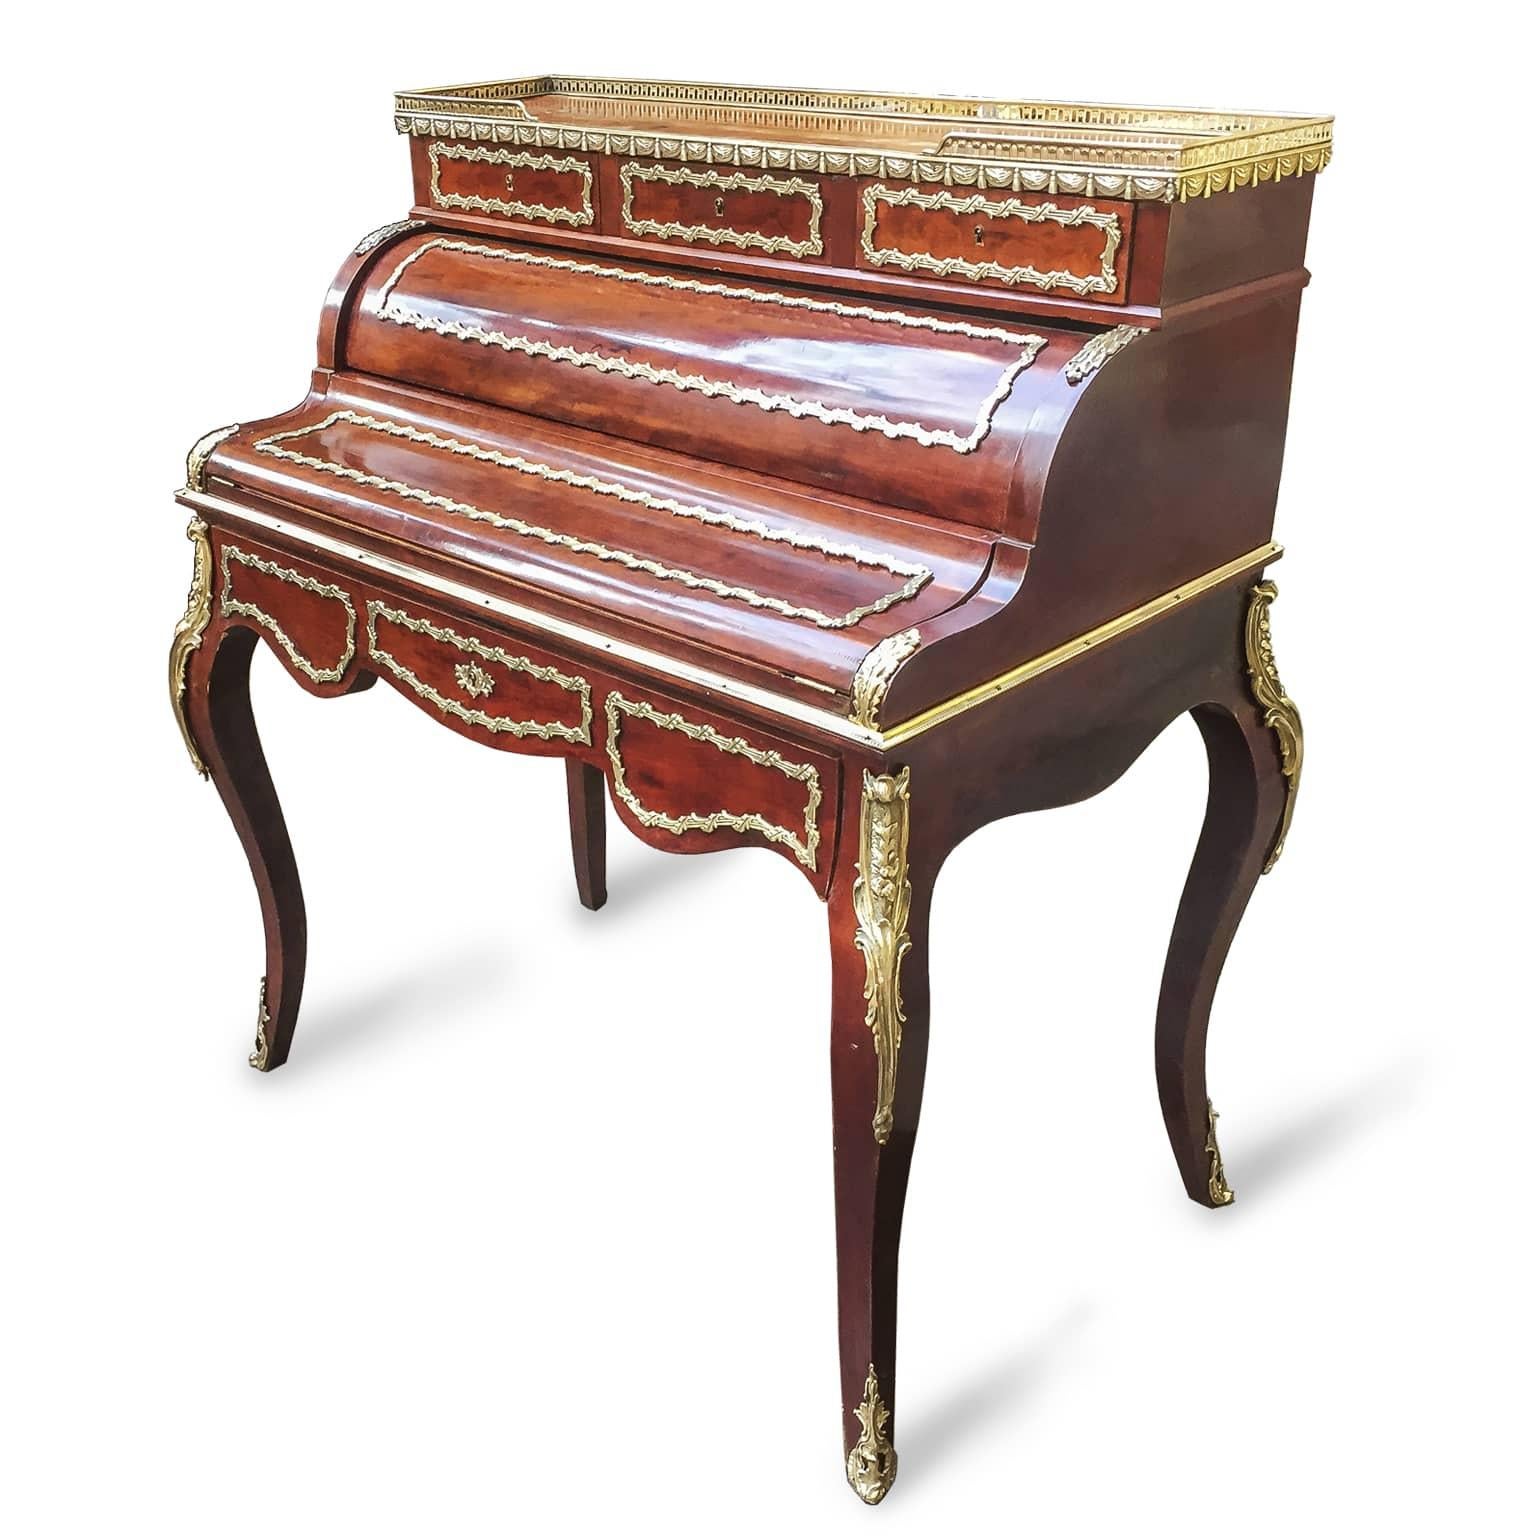 A late 19th century Napoleon III bronze-mounted mahogany bureau à cylinder, an elegant French Bureau de Dame or Bonheur du Jour, a ladies writing desk with cartonnier which opens up by sliding the central drawer. Inside, a writing table with dark